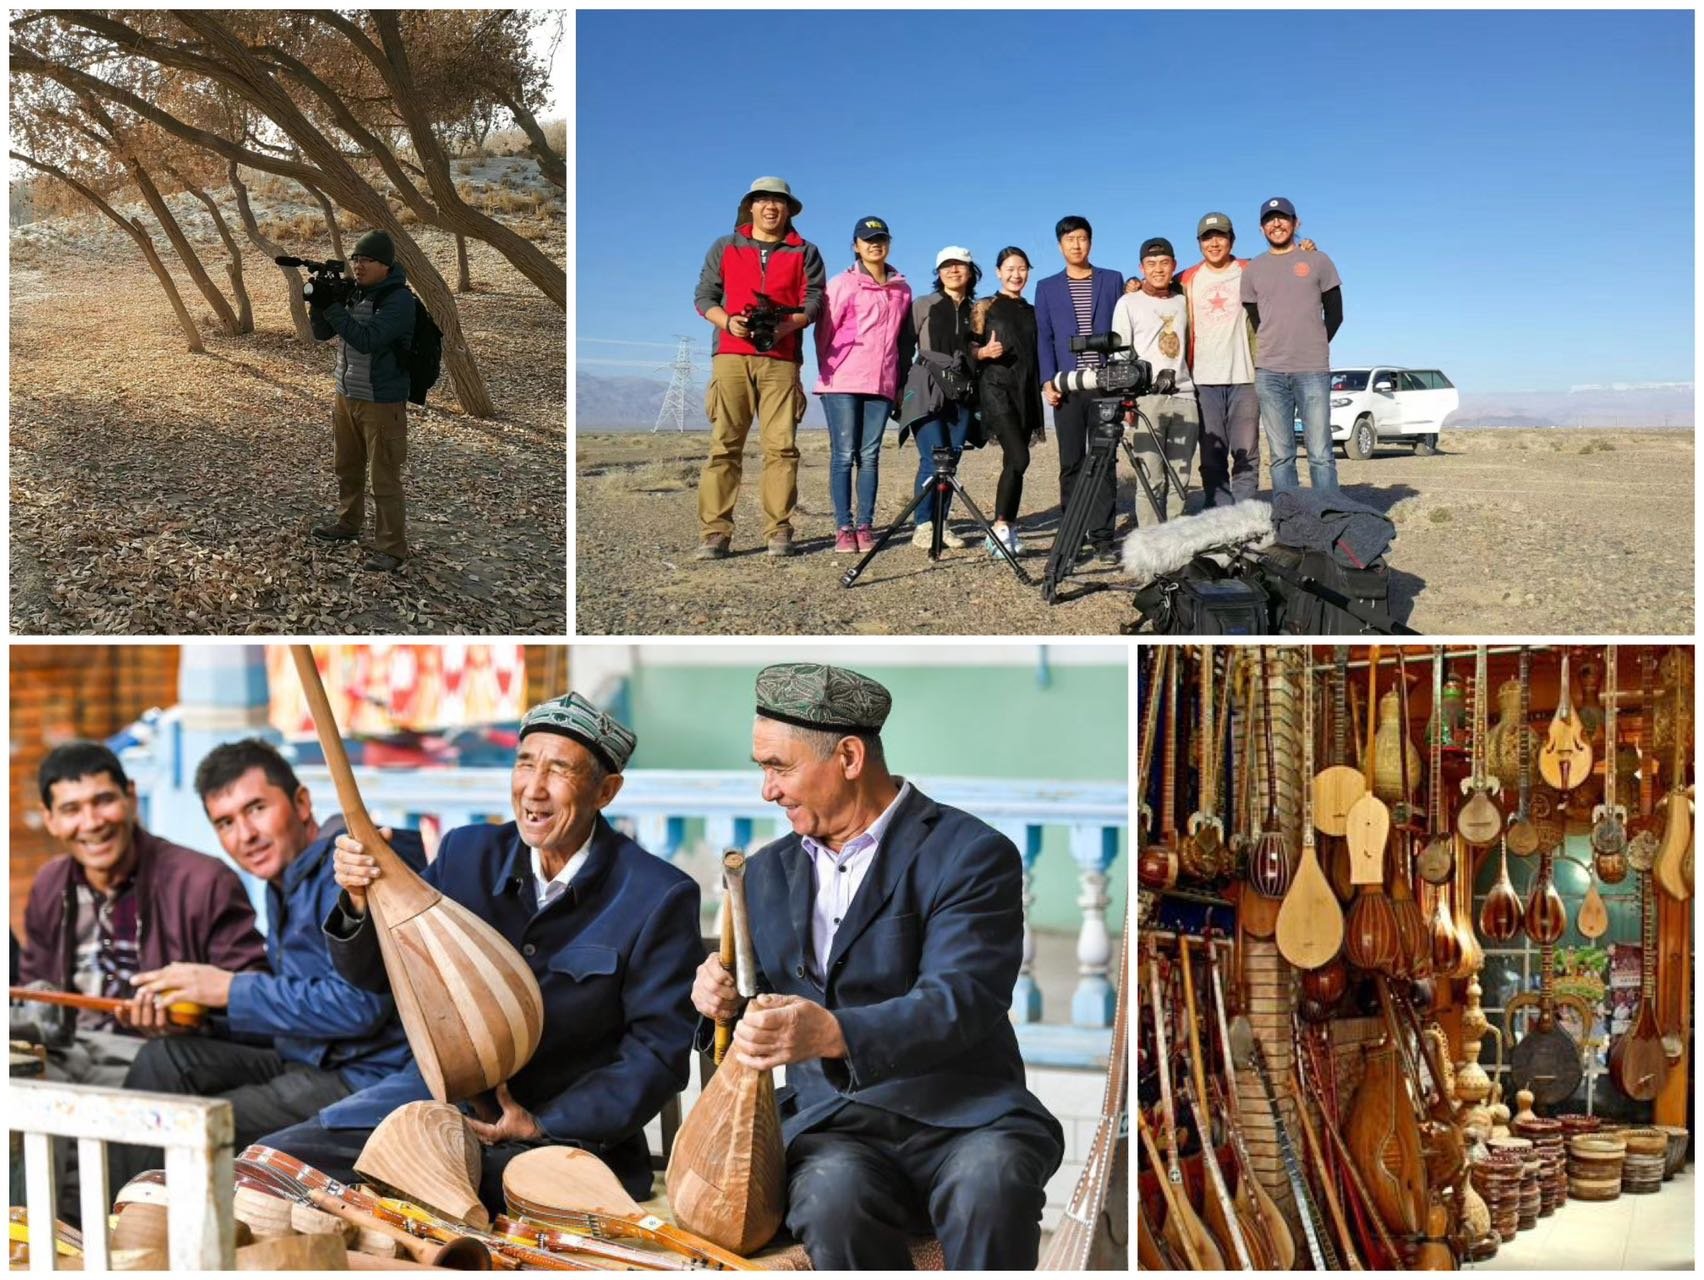 Dajiang's favourite destination in China: 新疆 [Xīnjiāng], where he spent 6 months filming a documentary and learning about ئۇيغۇرلار [Uyghur] musical instruments.